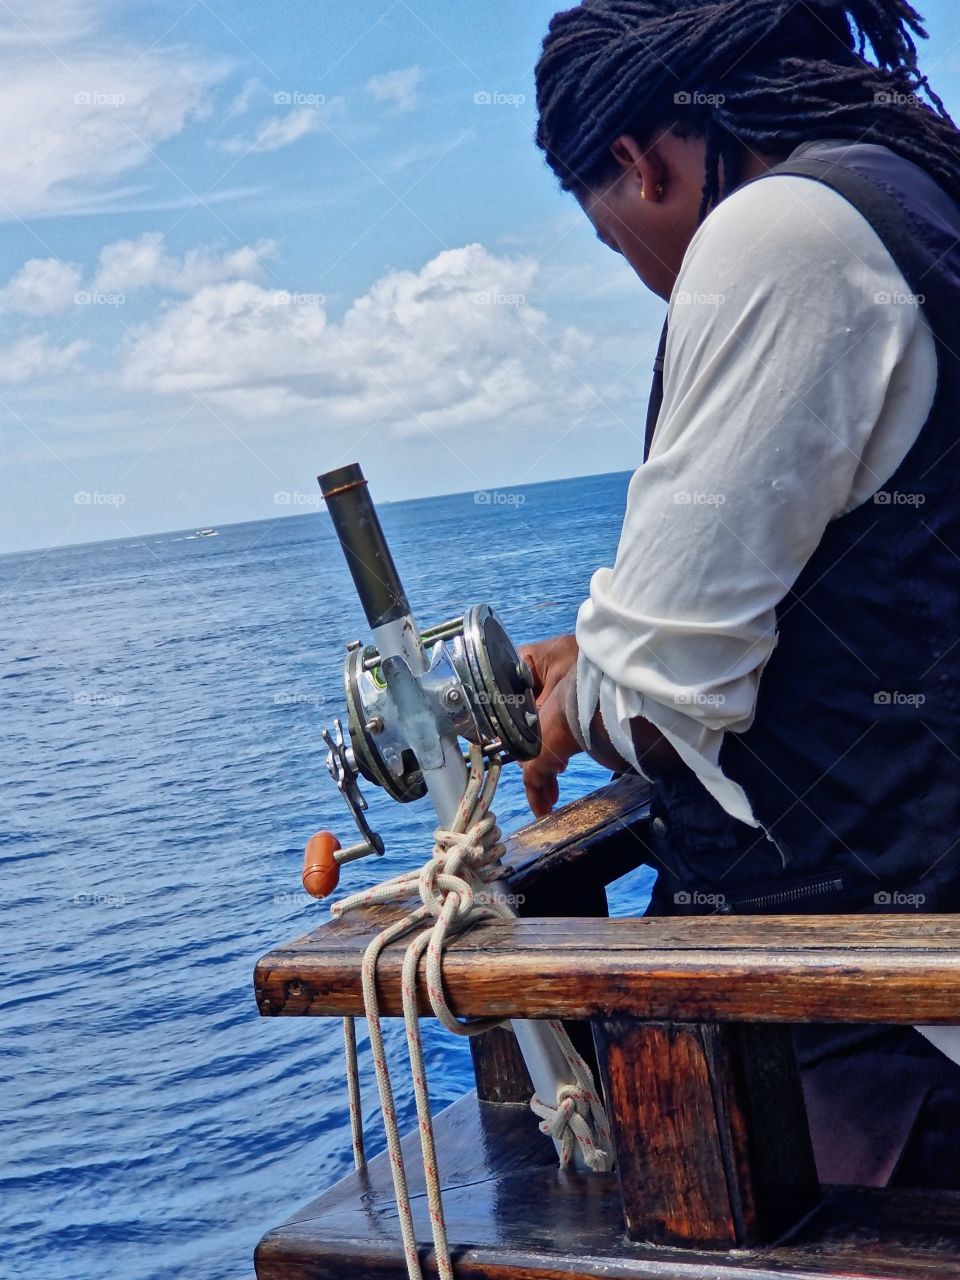 Islander checking fishing line that drags alongside the pirate ship